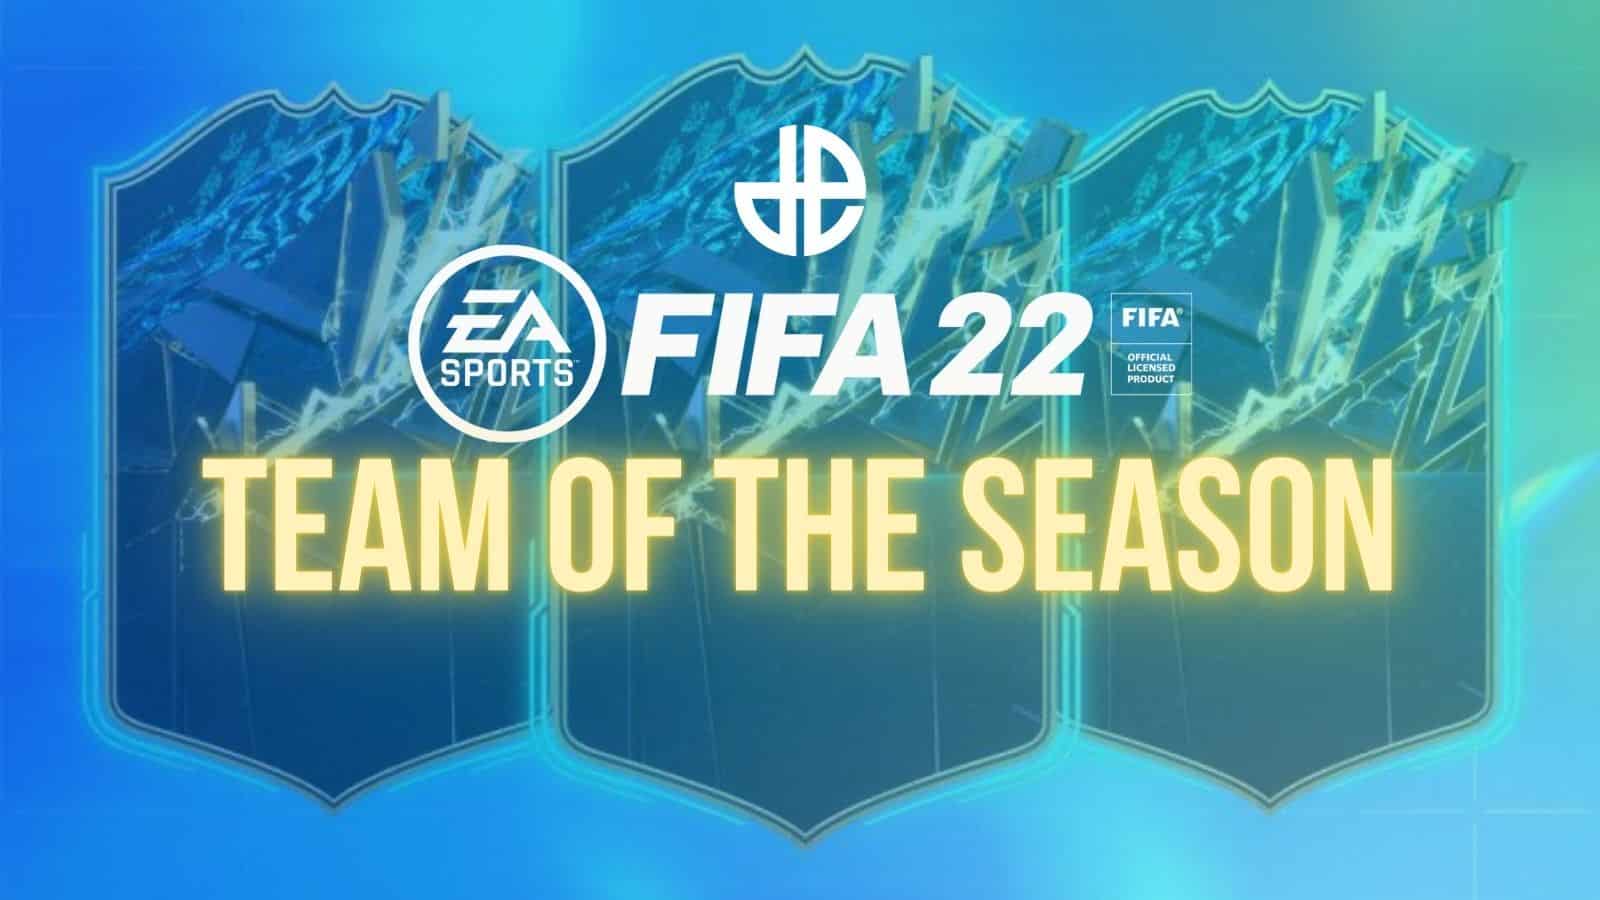 How to claim free FIFA 22 Ultimate Team Twitch Prime Gaming pack - Charlie  INTEL